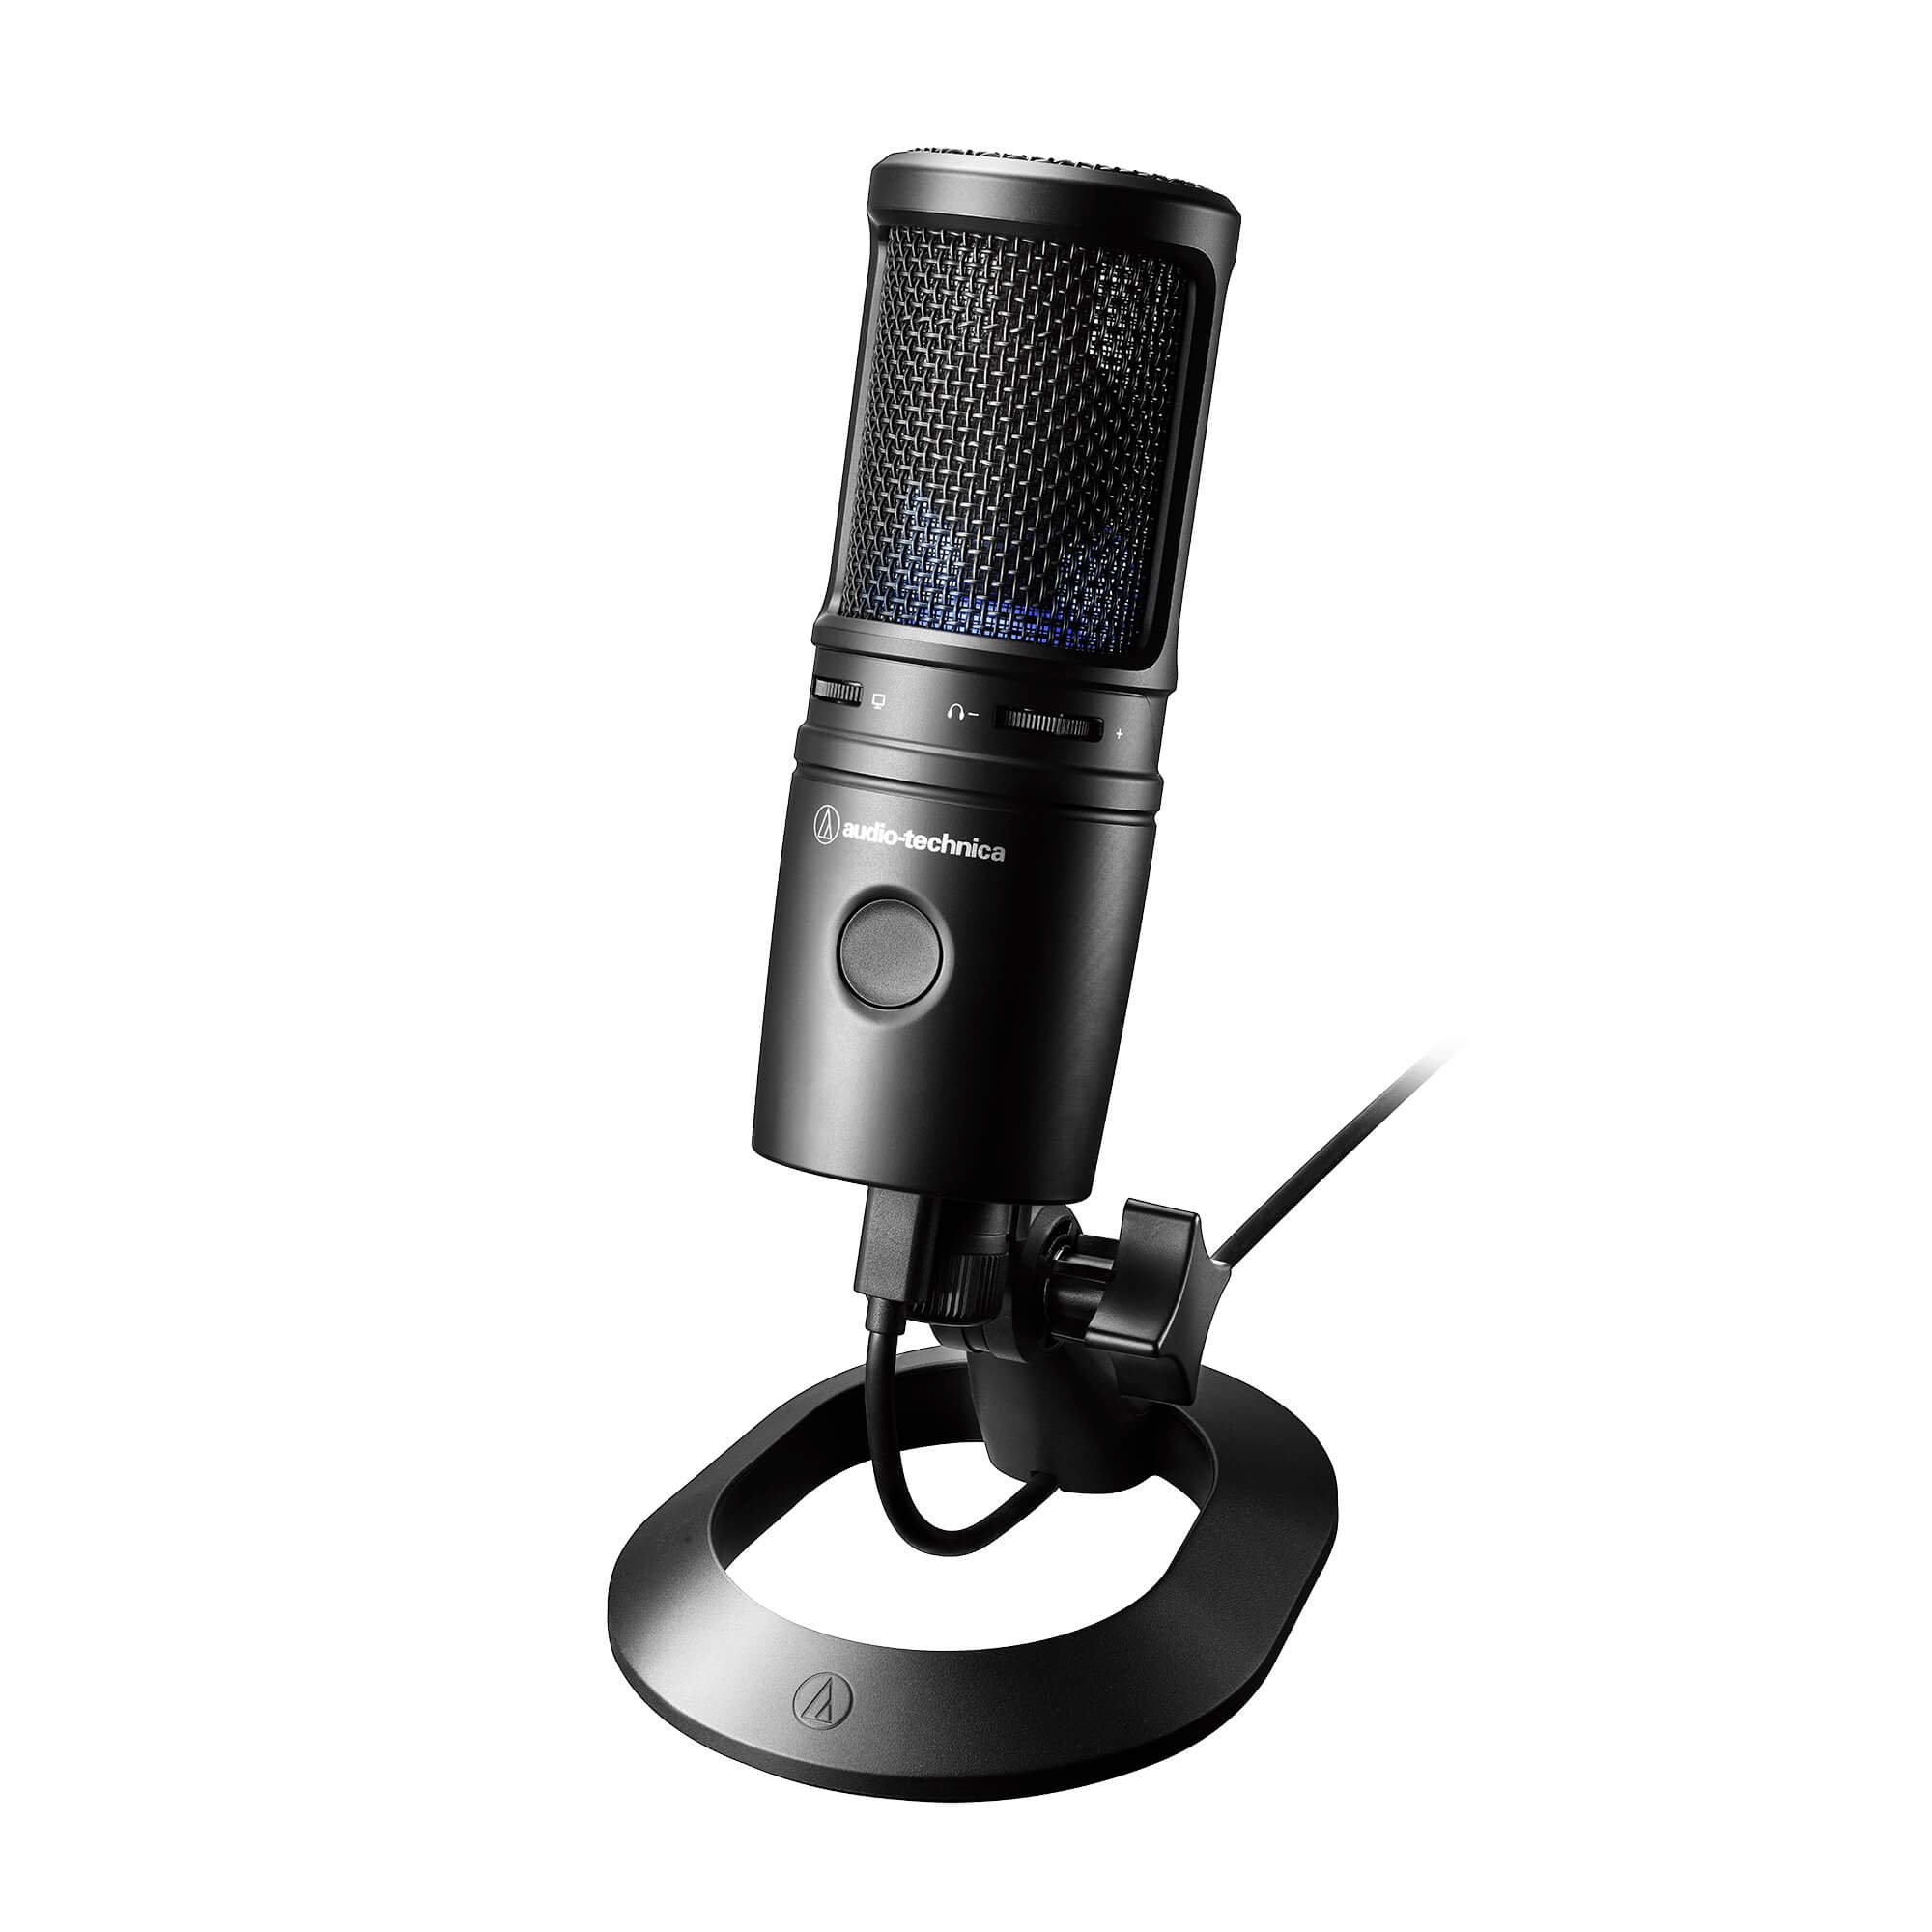 Audio-Technica AT2020 Cardioid Condenser Mic Review / Test 